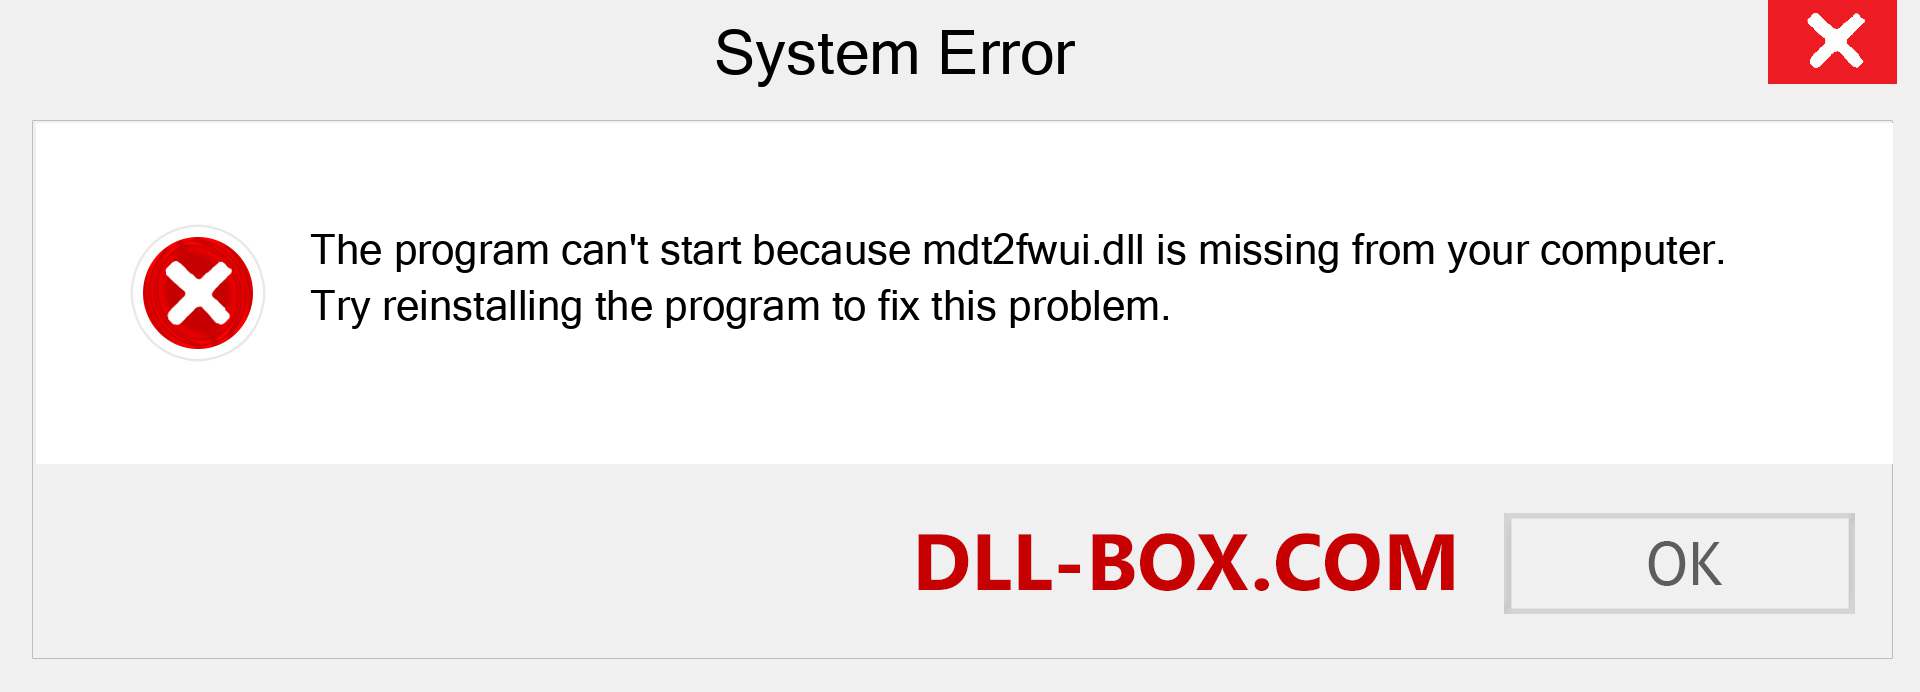  mdt2fwui.dll file is missing?. Download for Windows 7, 8, 10 - Fix  mdt2fwui dll Missing Error on Windows, photos, images